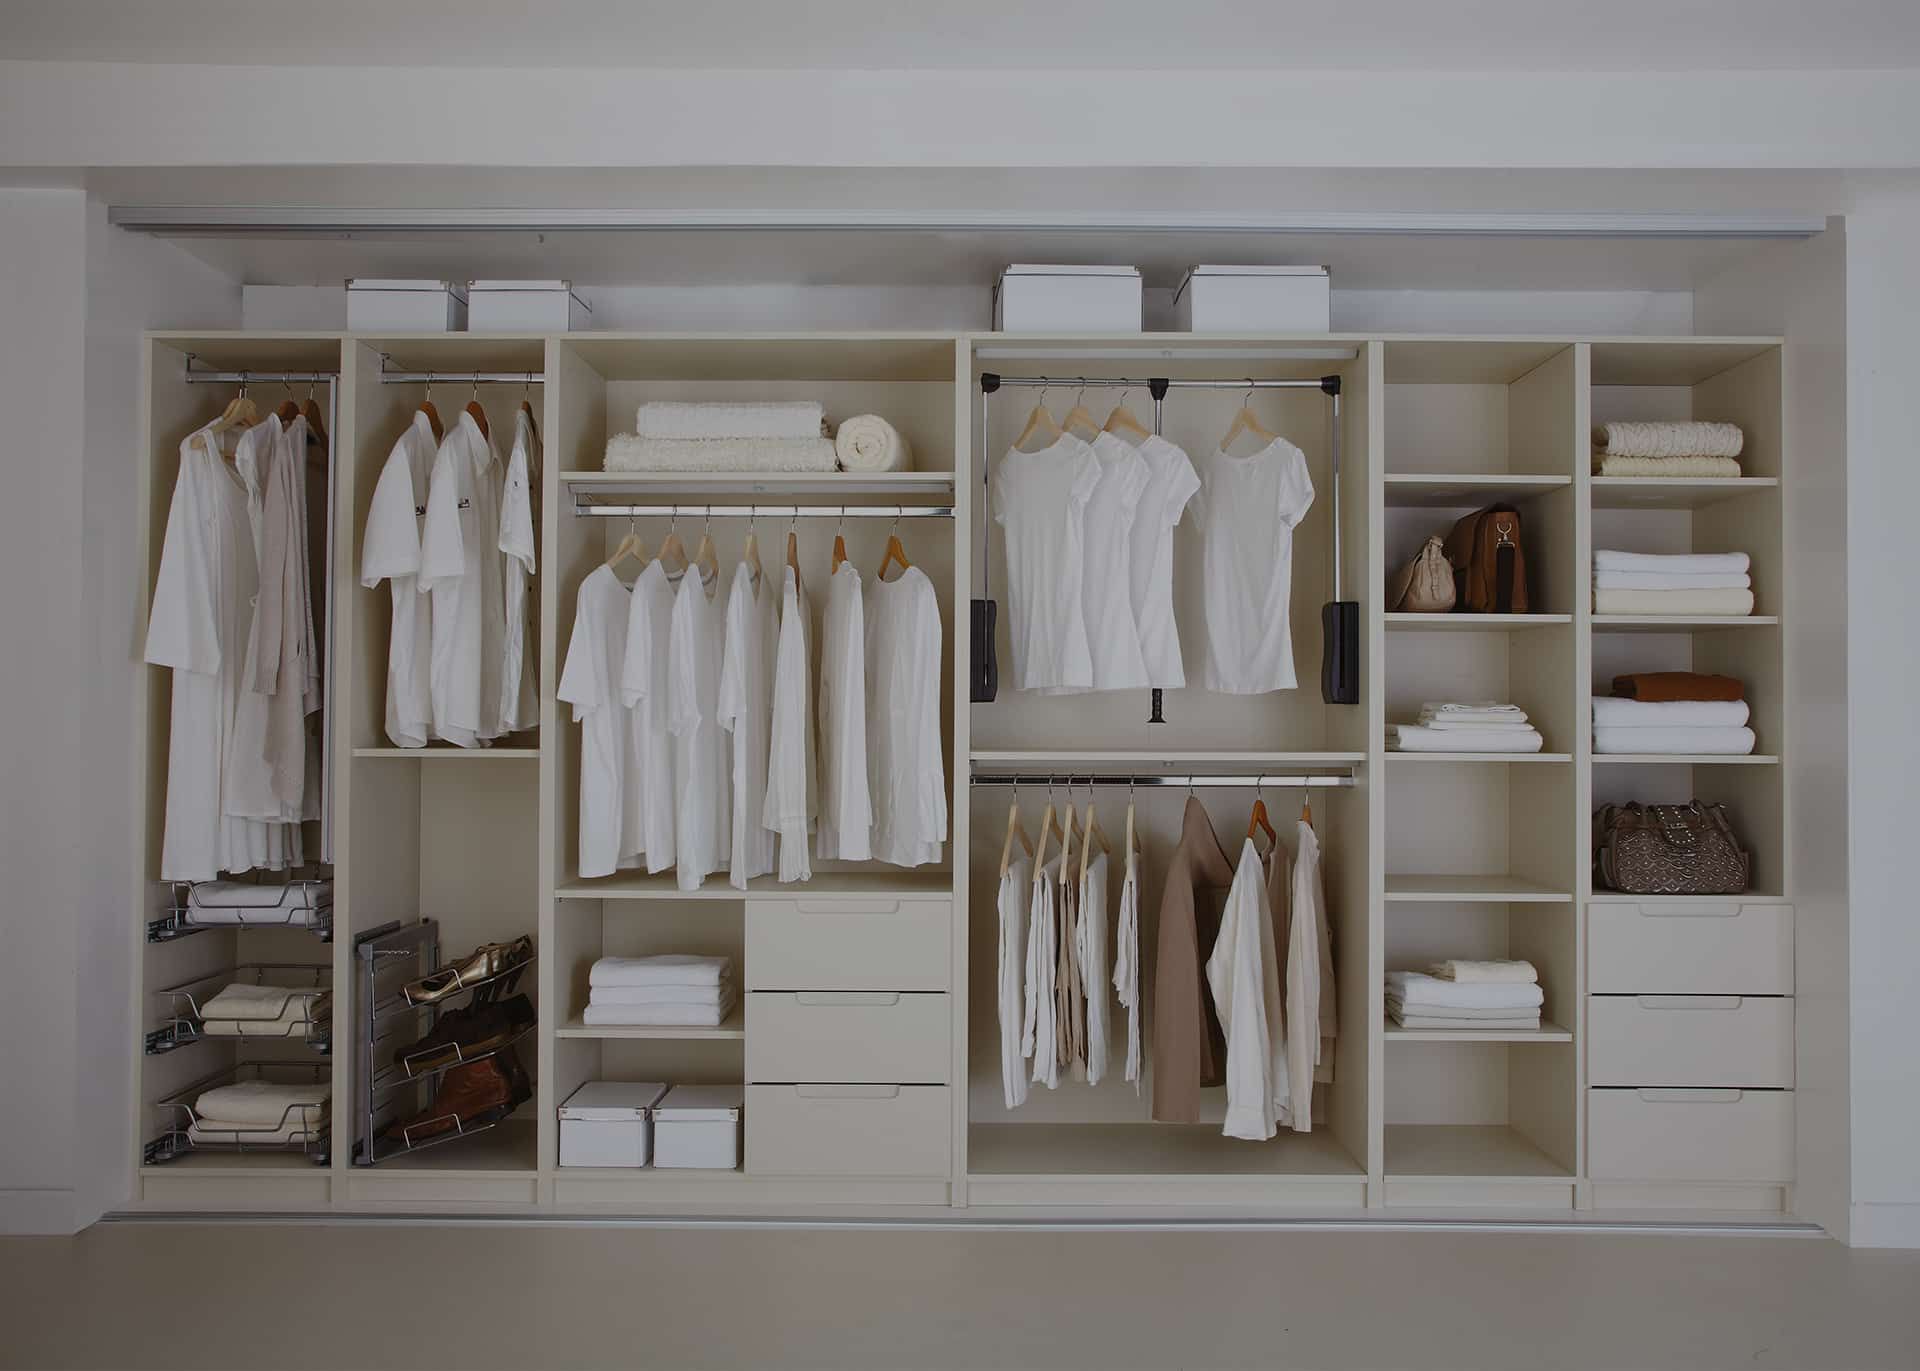 Fitted Wardrobes | Made To Measure Wardrobes | Glide And Slide Intended For Built In Wardrobes (View 8 of 20)